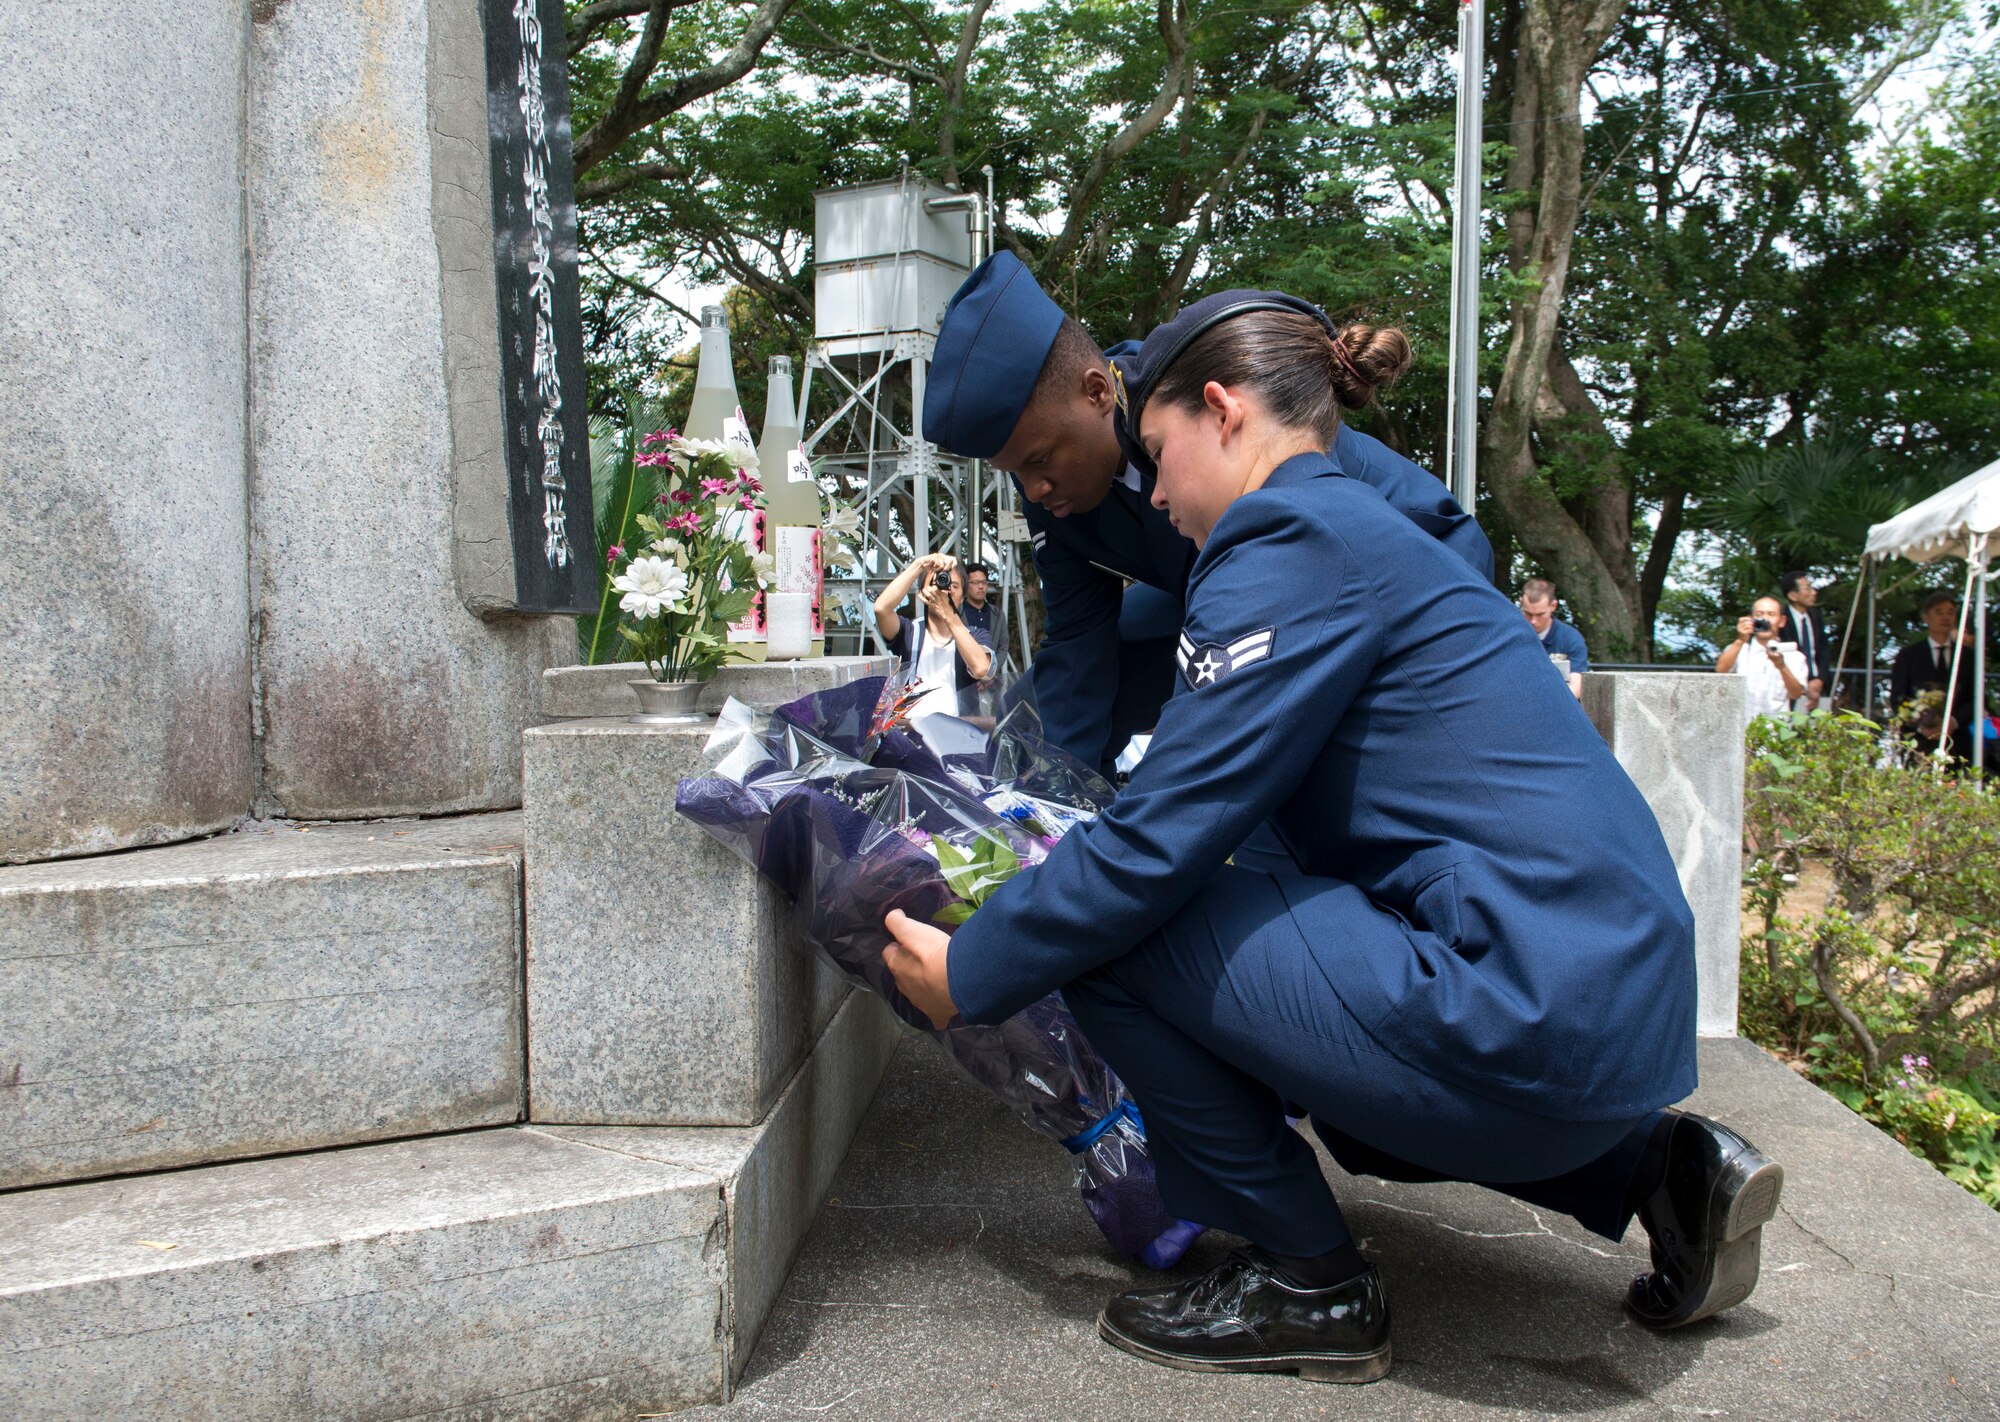 Airman 1st Class Veronica Hambel, 374th Security Forces Squadron patrolman (front), and Airman 1st Class John Mutiso, 374th Maintenance Operations Squadron documentation apprentice, lay flowers at the base of the Japanese memorial statue during the 47th annual B-29 Memorial Ceremony at Sengen Shrine in Shizuoka City, Japan, June 22, 2019.